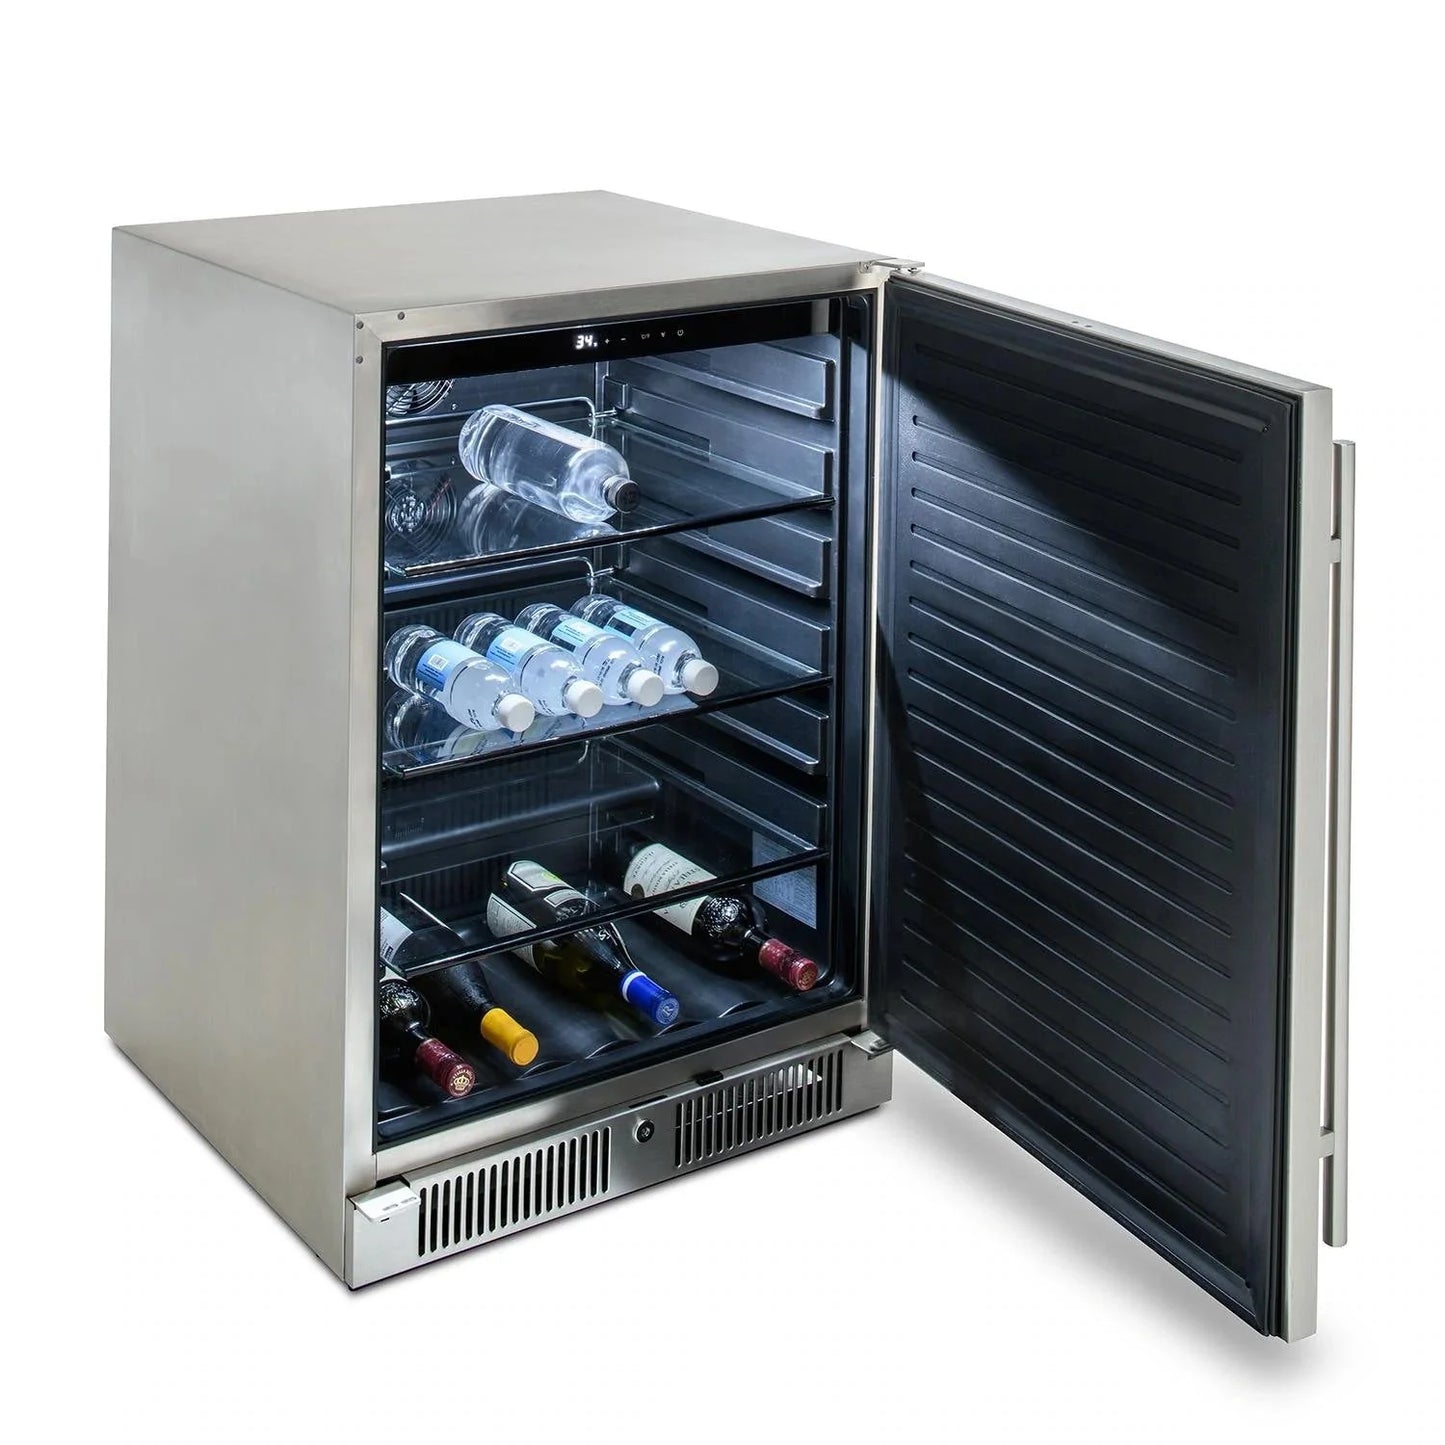 Blaze 24" Outdoor Rated Compact Refrigerator | 5.5 Cu. Ft.